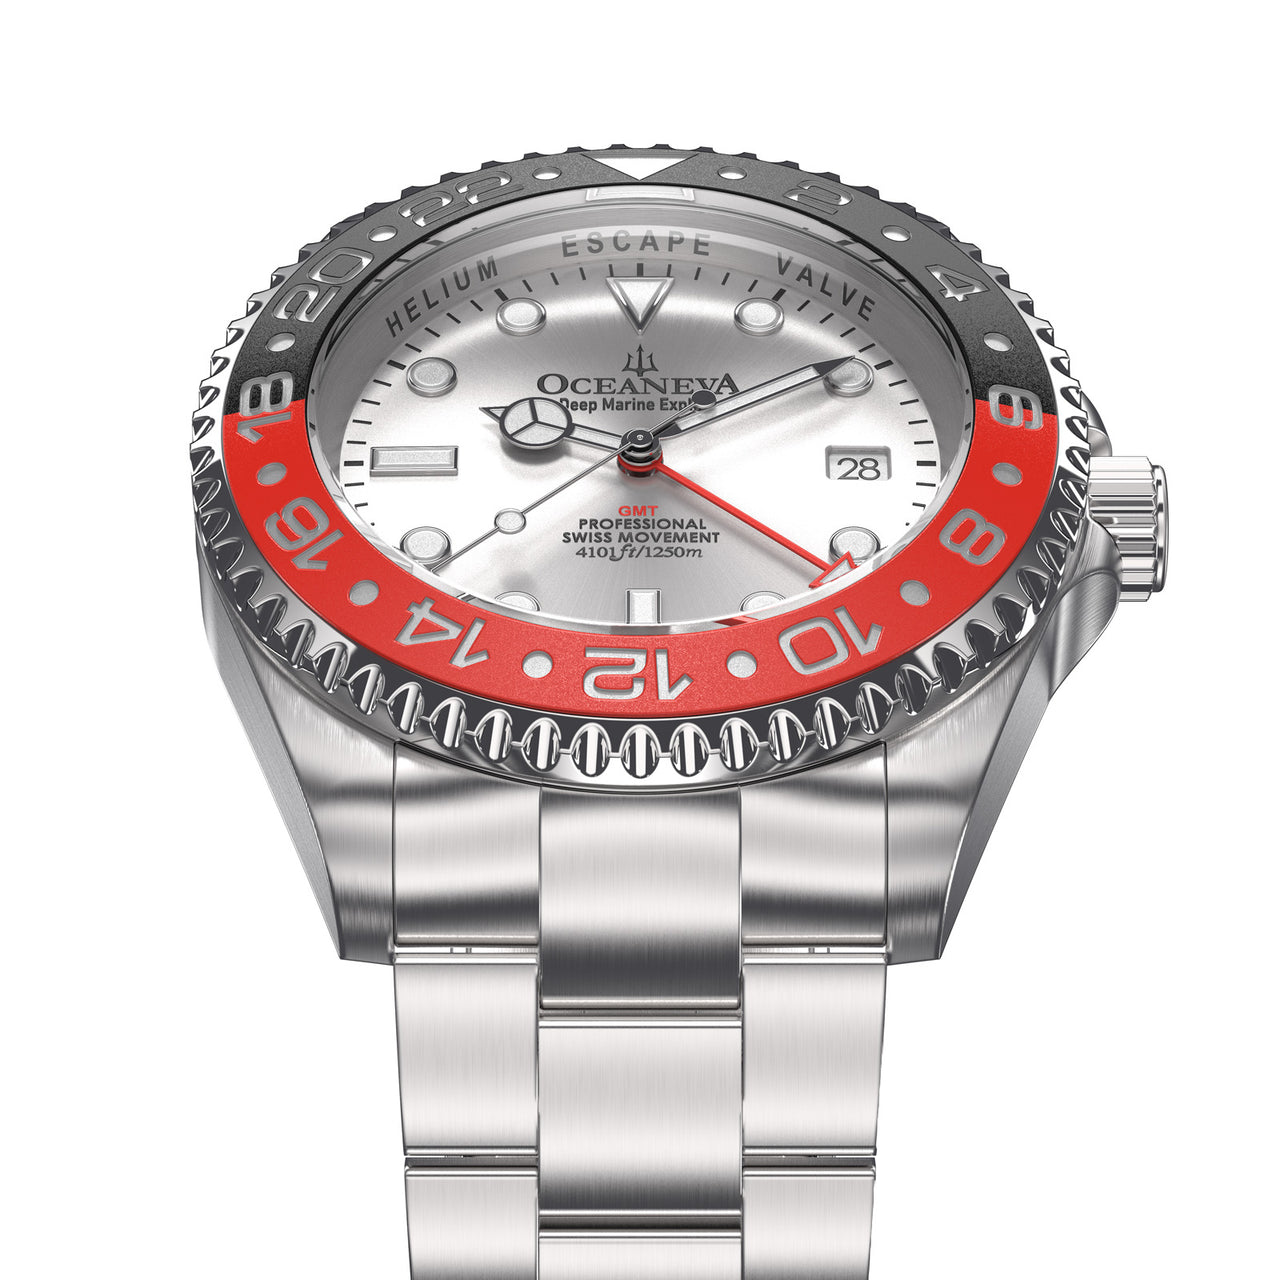 Oceaneva 1250M GMT Dive Watch Silver Red And Black Frontal View Picture